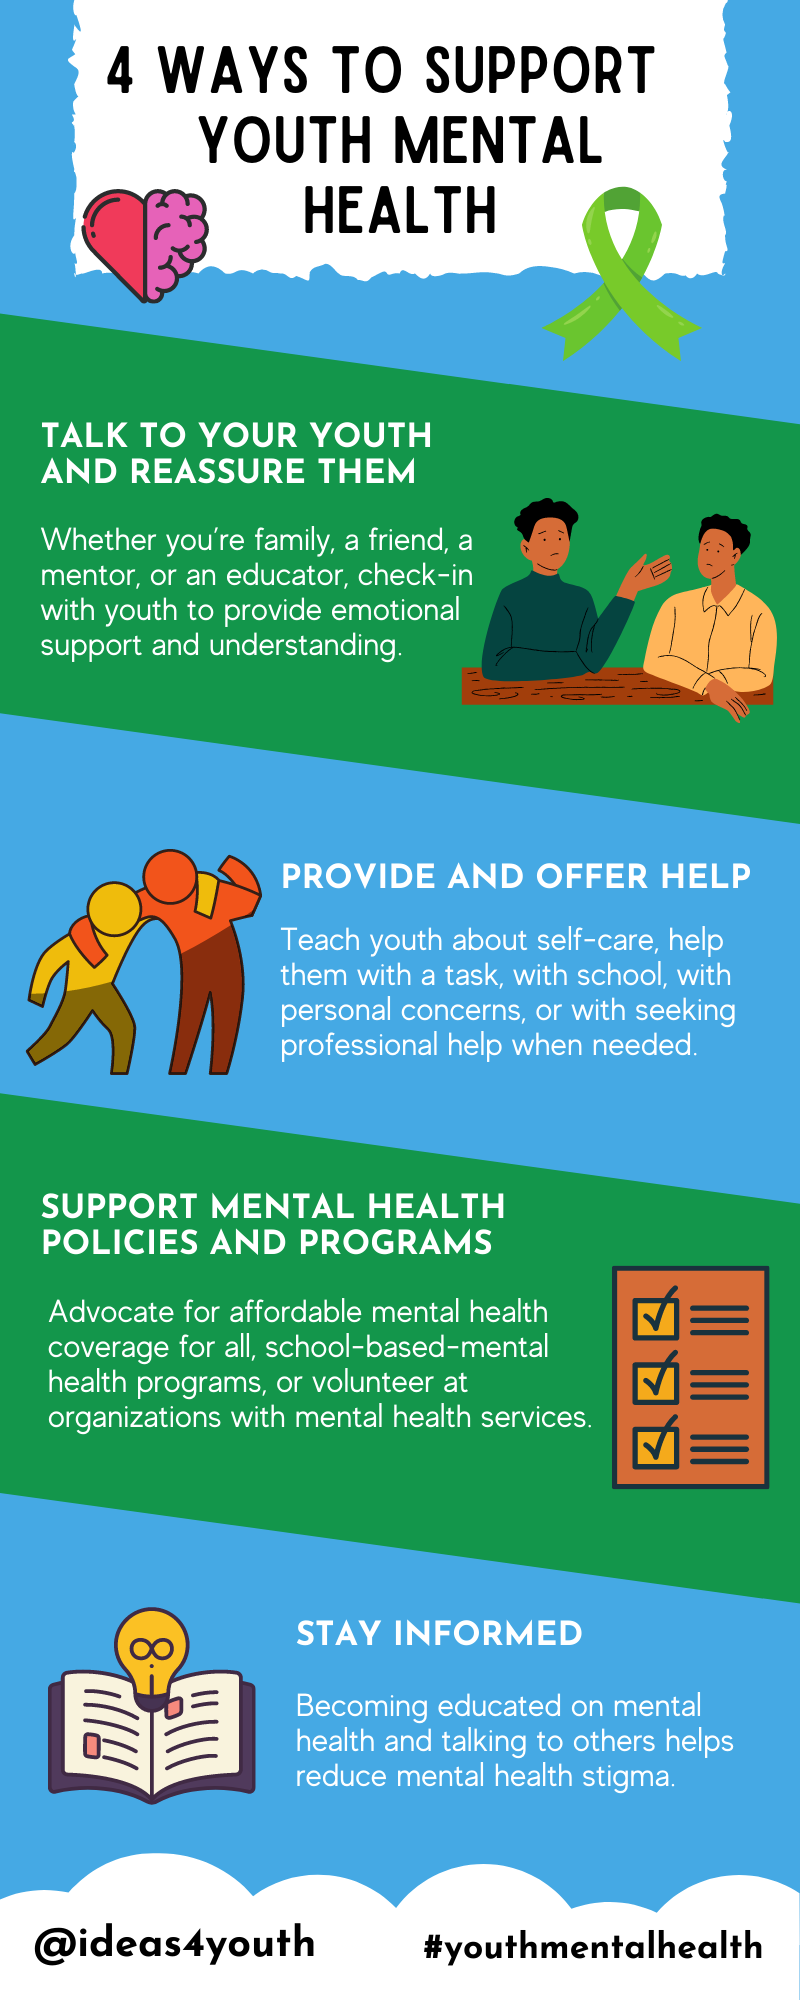 information on ways to support youth mental health